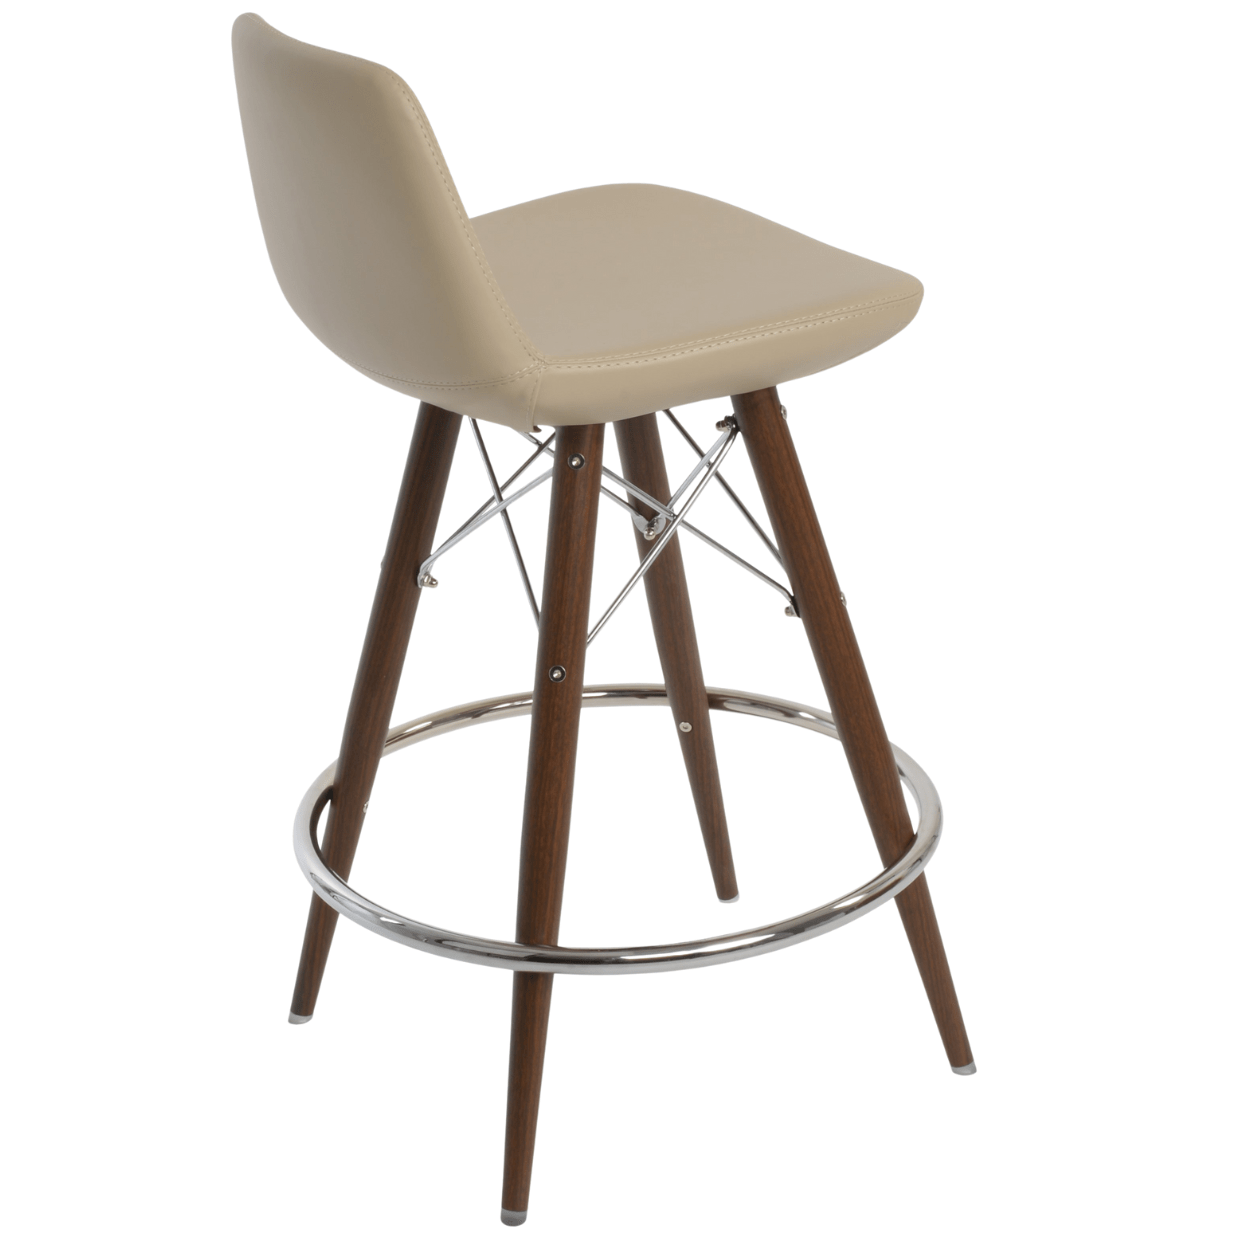 Pera MW Metal and Leather Bar Stools - Your Bar Stools Canada